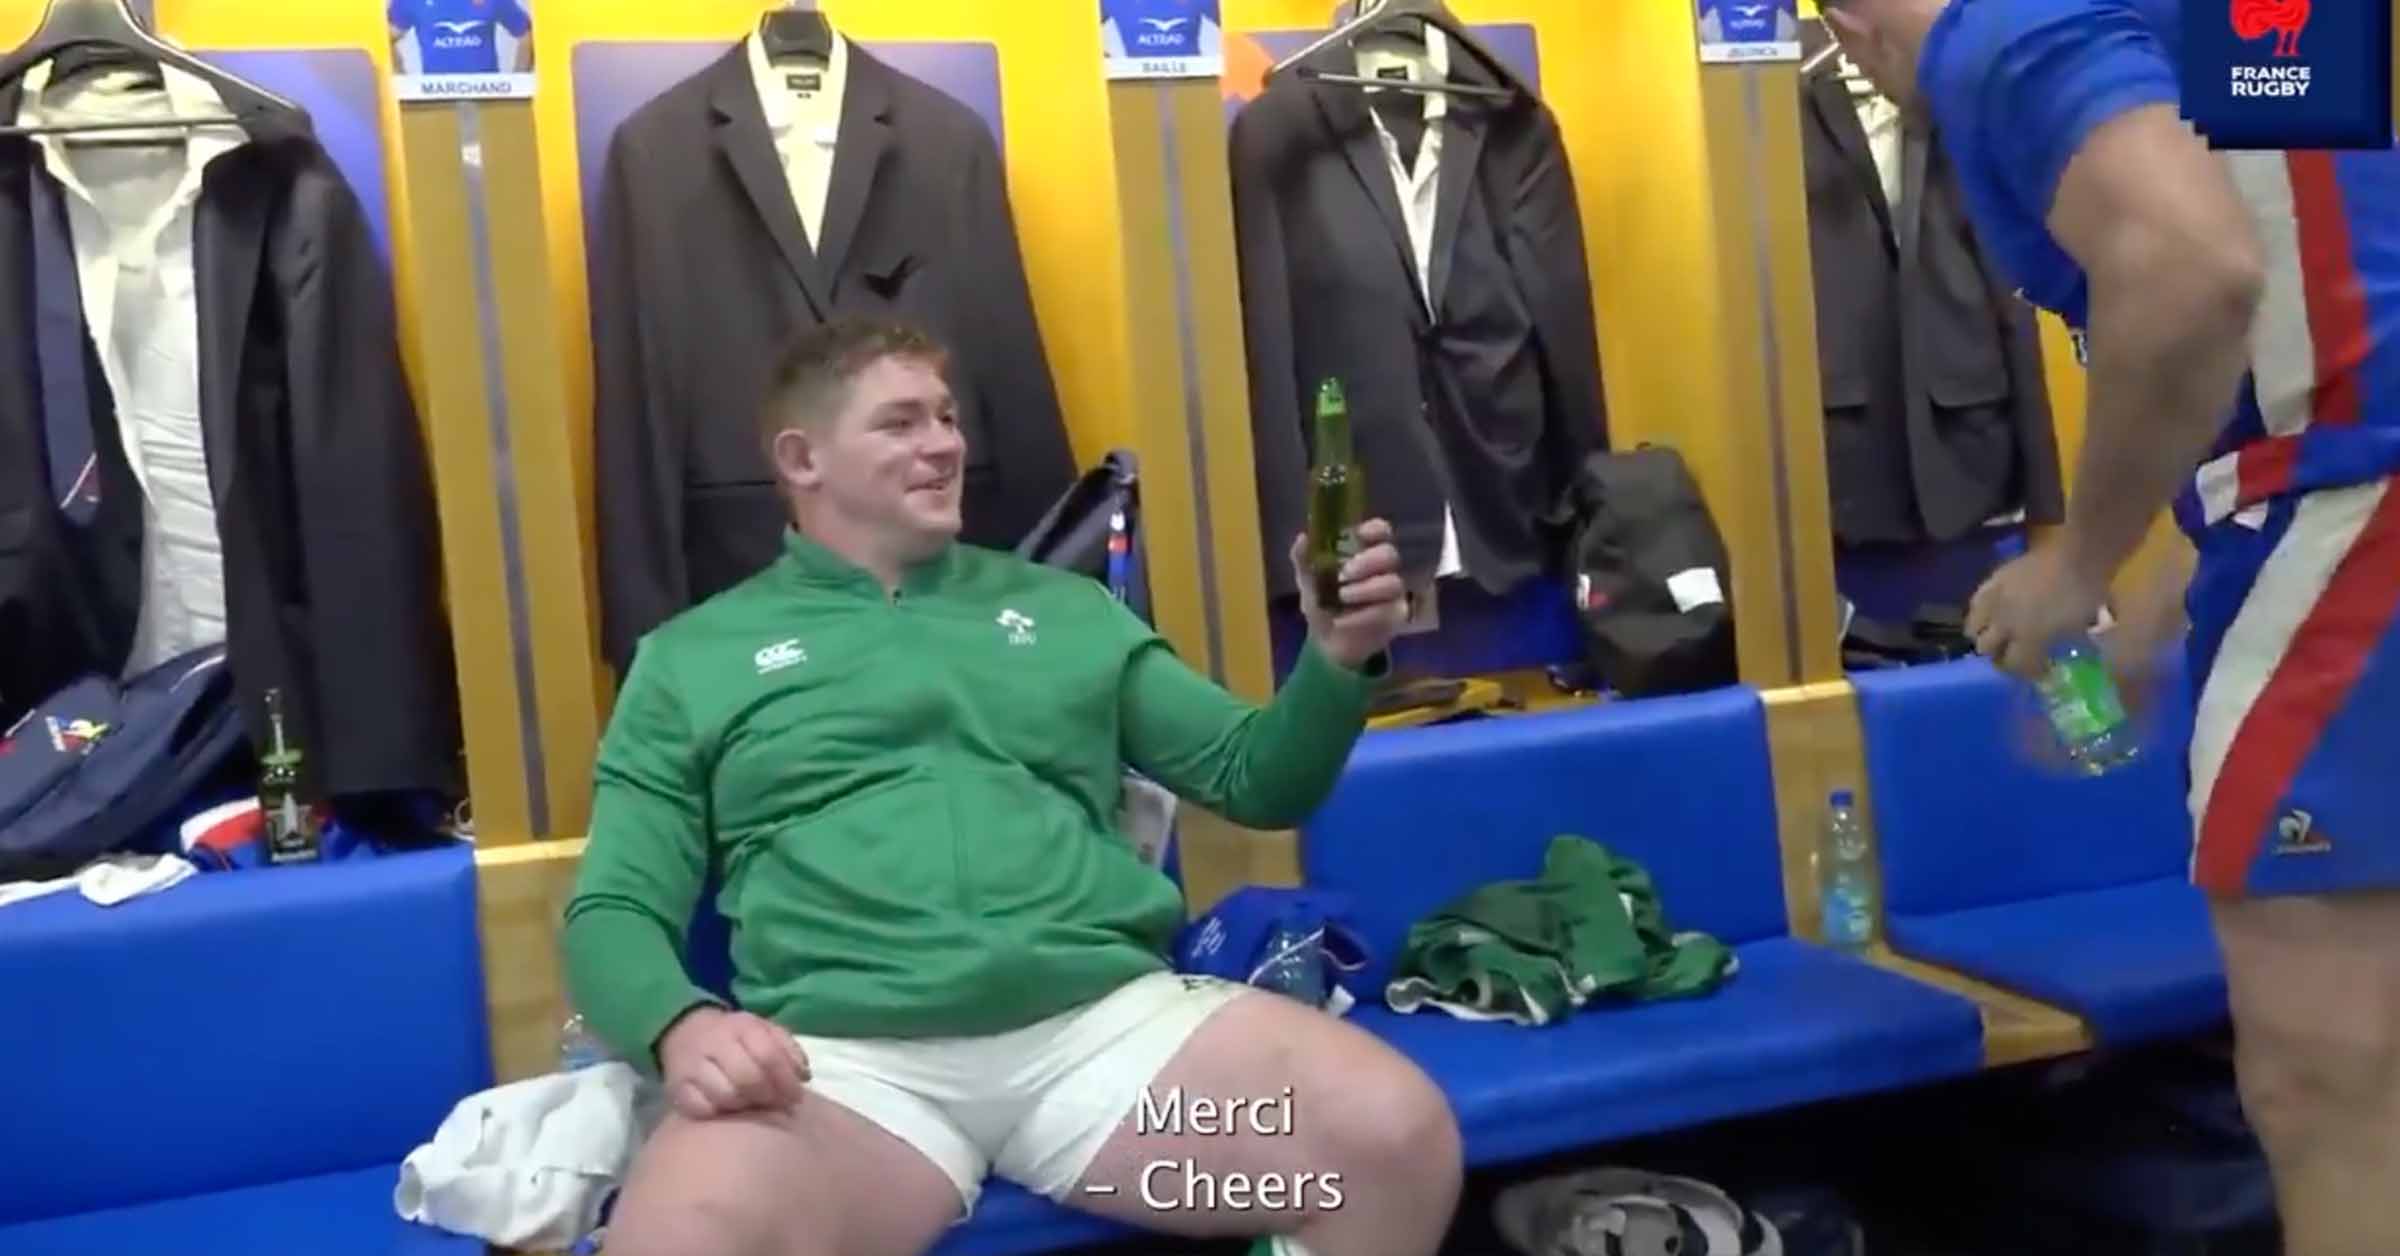 and rugby in the one video, the Wexford prop went into the French dressing room...